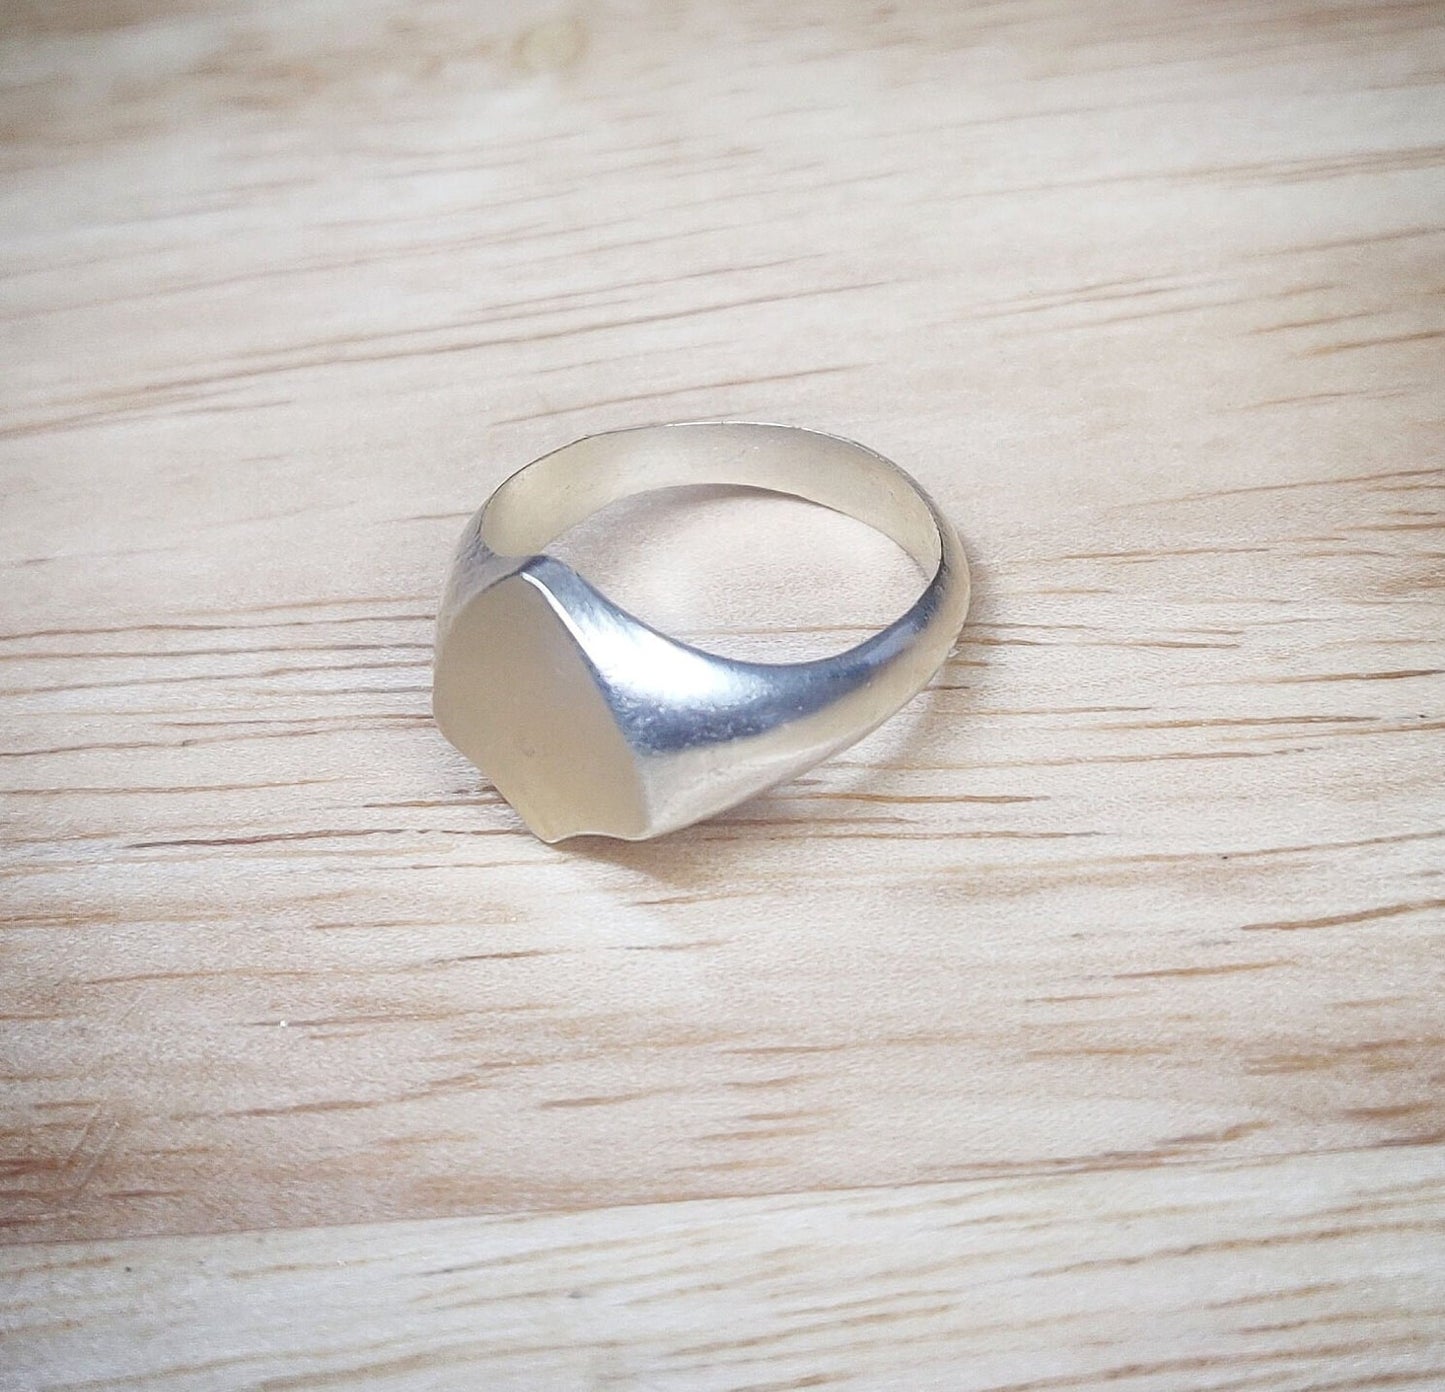 13mm Shield Signet Ring. Blank Mens or Womens Signet Ring for Jewelry Making, Engraving and Gem setting in Silver or 9ct Yellow Gold